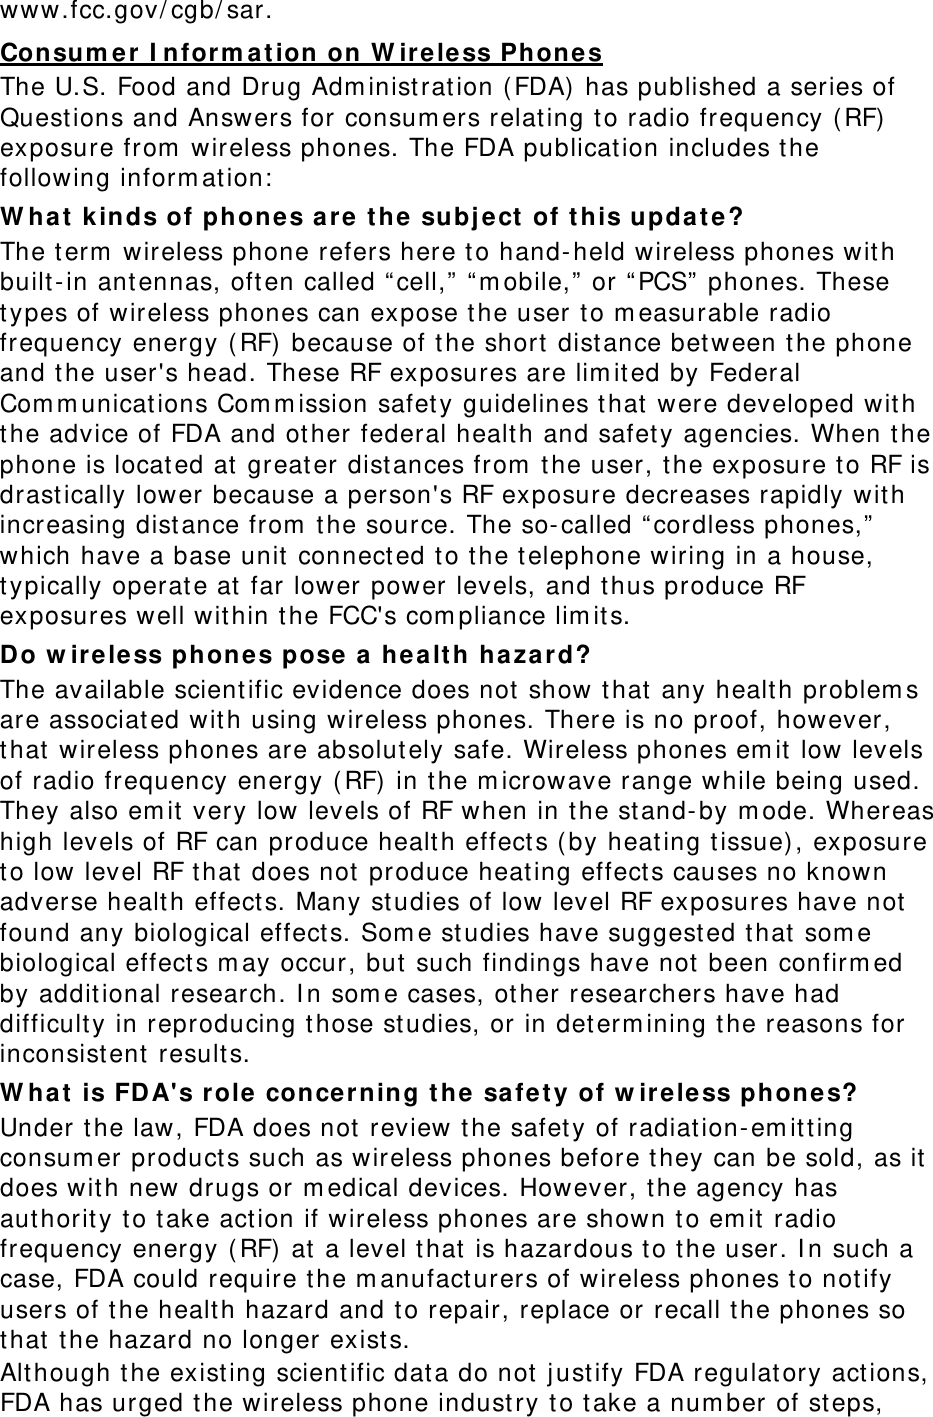 www.fcc.gov/cgb/sar. Consumer Information on Wireless Phones The U.S. Food and Drug Administration (FDA) has published a series of Questions and Answers for consumers relating to radio frequency (RF) exposure from wireless phones. The FDA publication includes the following information: What kinds of phones are the subject of this update? The term wireless phone refers here to hand-held wireless phones with built-in antennas, often called “cell,” “mobile,” or “PCS” phones. These types of wireless phones can expose the user to measurable radio frequency energy (RF) because of the short distance between the phone and the user&apos;s head. These RF exposures are limited by Federal Communications Commission safety guidelines that were developed with the advice of FDA and other federal health and safety agencies. When the phone is located at greater distances from the user, the exposure to RF is drastically lower because a person&apos;s RF exposure decreases rapidly with increasing distance from the source. The so-called “cordless phones,” which have a base unit connected to the telephone wiring in a house, typically operate at far lower power levels, and thus produce RF exposures well within the FCC&apos;s compliance limits. Do wireless phones pose a health hazard? The available scientific evidence does not show that any health problems are associated with using wireless phones. There is no proof, however, that wireless phones are absolutely safe. Wireless phones emit low levels of radio frequency energy (RF) in the microwave range while being used. They also emit very low levels of RF when in the stand-by mode. Whereas high levels of RF can produce health effects (by heating tissue), exposure to low level RF that does not produce heating effects causes no known adverse health effects. Many studies of low level RF exposures have not found any biological effects. Some studies have suggested that some biological effects may occur, but such findings have not been confirmed by additional research. In some cases, other researchers have had difficulty in reproducing those studies, or in determining the reasons for inconsistent results. What is FDA&apos;s role concerning the safety of wireless phones? Under the law, FDA does not review the safety of radiation-emitting consumer products such as wireless phones before they can be sold, as it does with new drugs or medical devices. However, the agency has authority to take action if wireless phones are shown to emit radio frequency energy (RF) at a level that is hazardous to the user. In such a case, FDA could require the manufacturers of wireless phones to notify users of the health hazard and to repair, replace or recall the phones so that the hazard no longer exists. Although the existing scientific data do not justify FDA regulatory actions, FDA has urged the wireless phone industry to take a number of steps, 